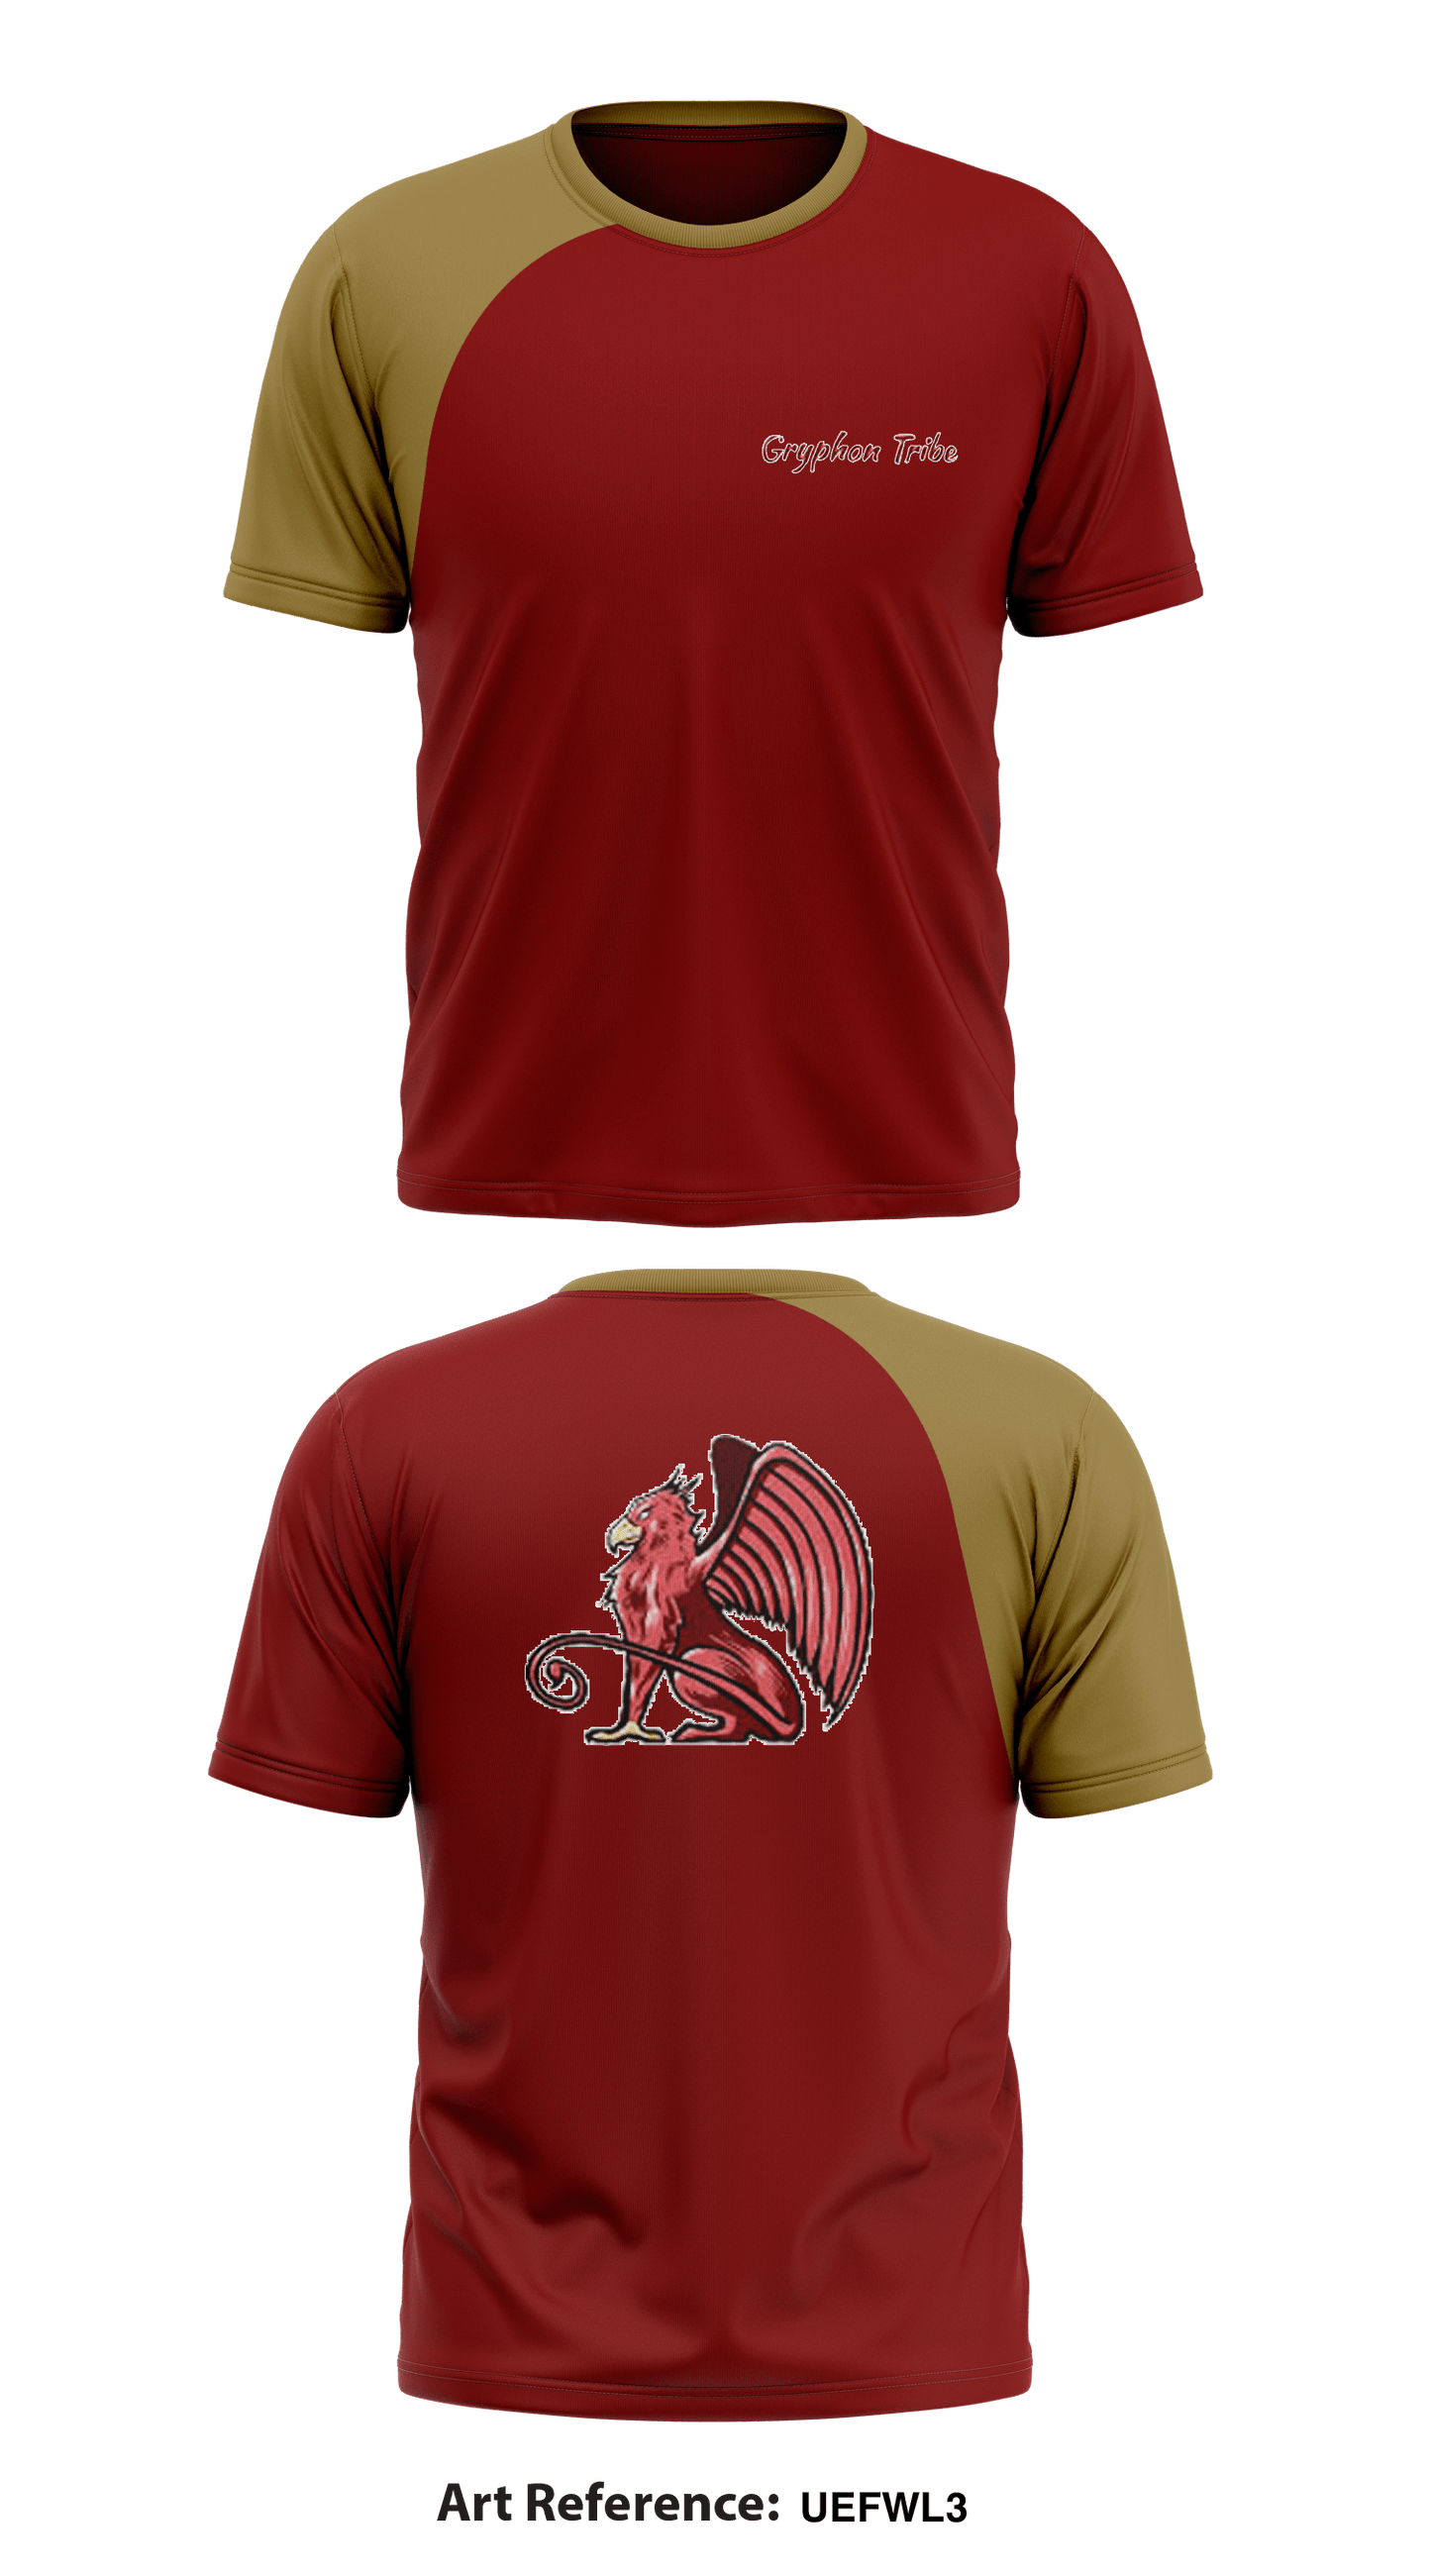 Gryphon Tribe Store 1 Core Men's SS Performance Tee - UeFwL3